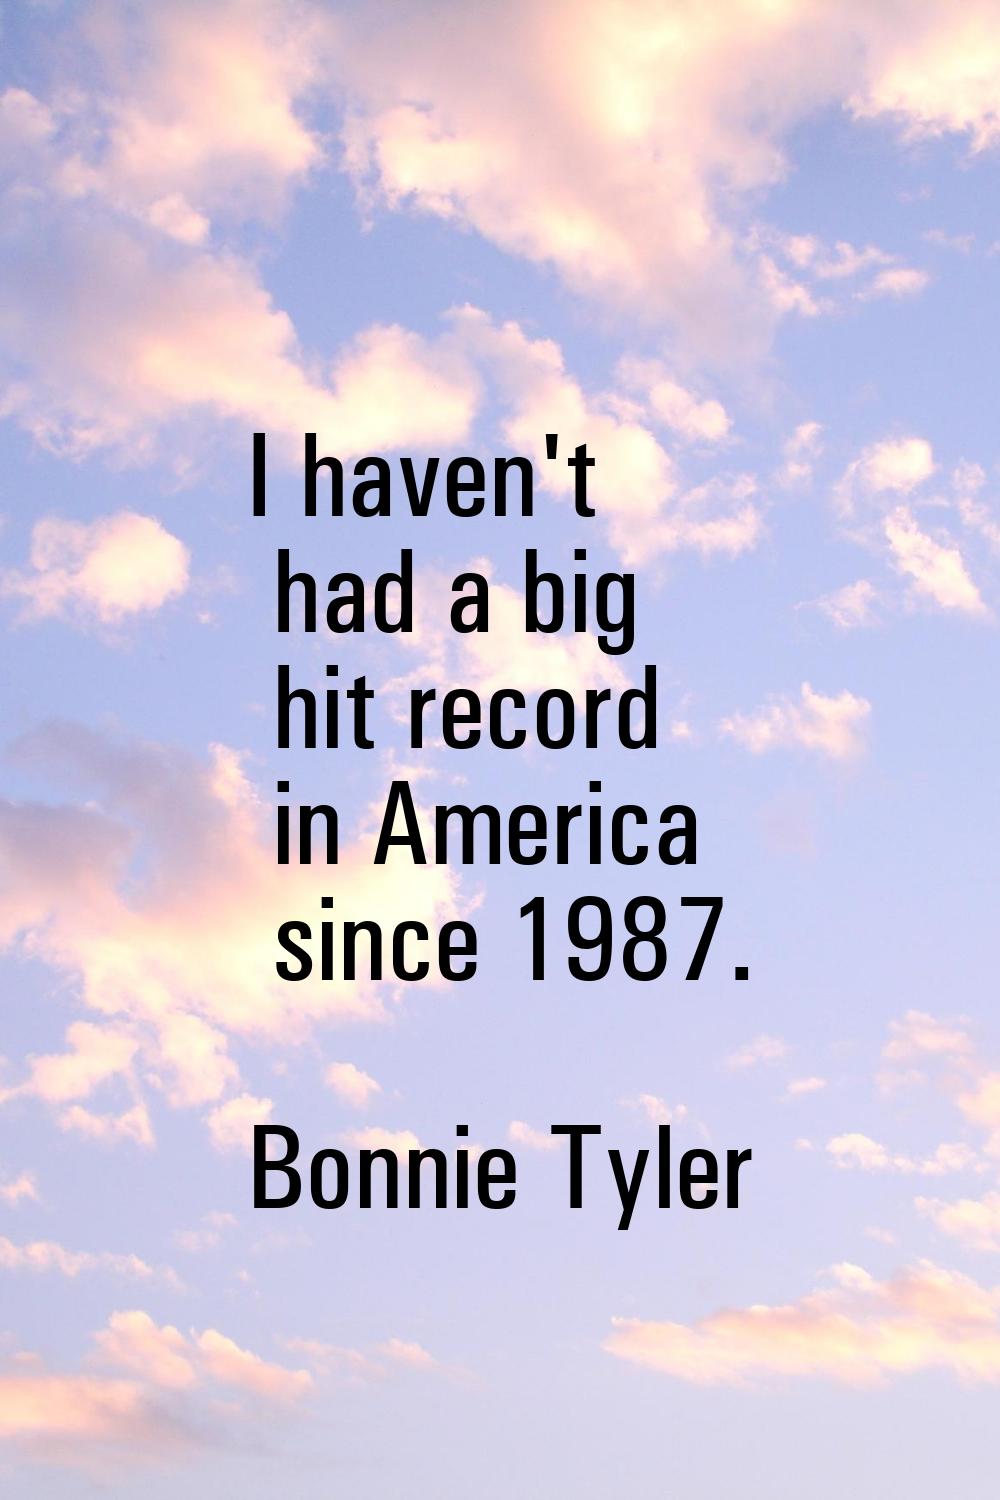 I haven't had a big hit record in America since 1987.